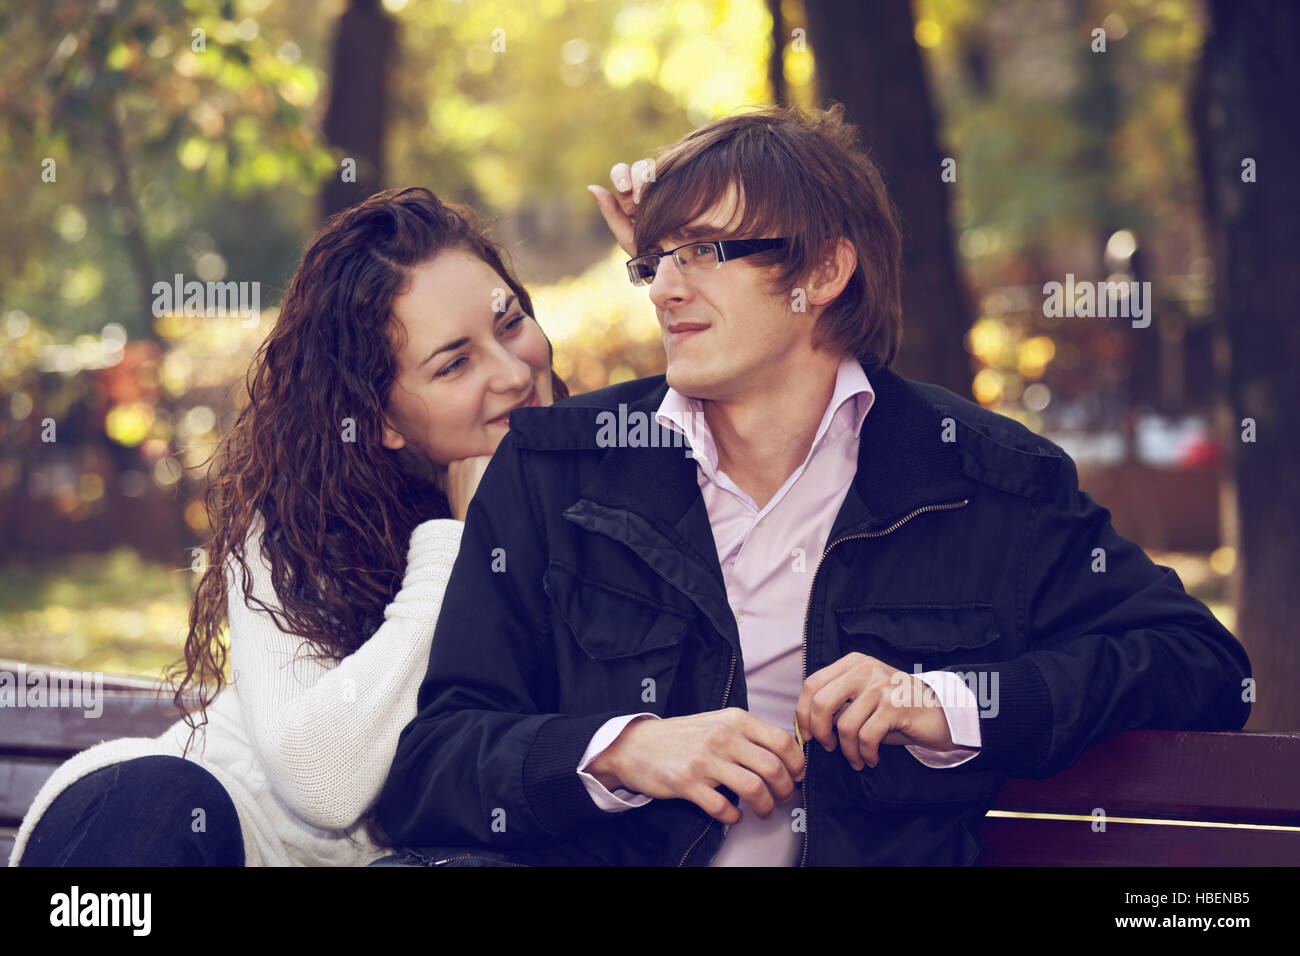 Couple in the park Stock Photo